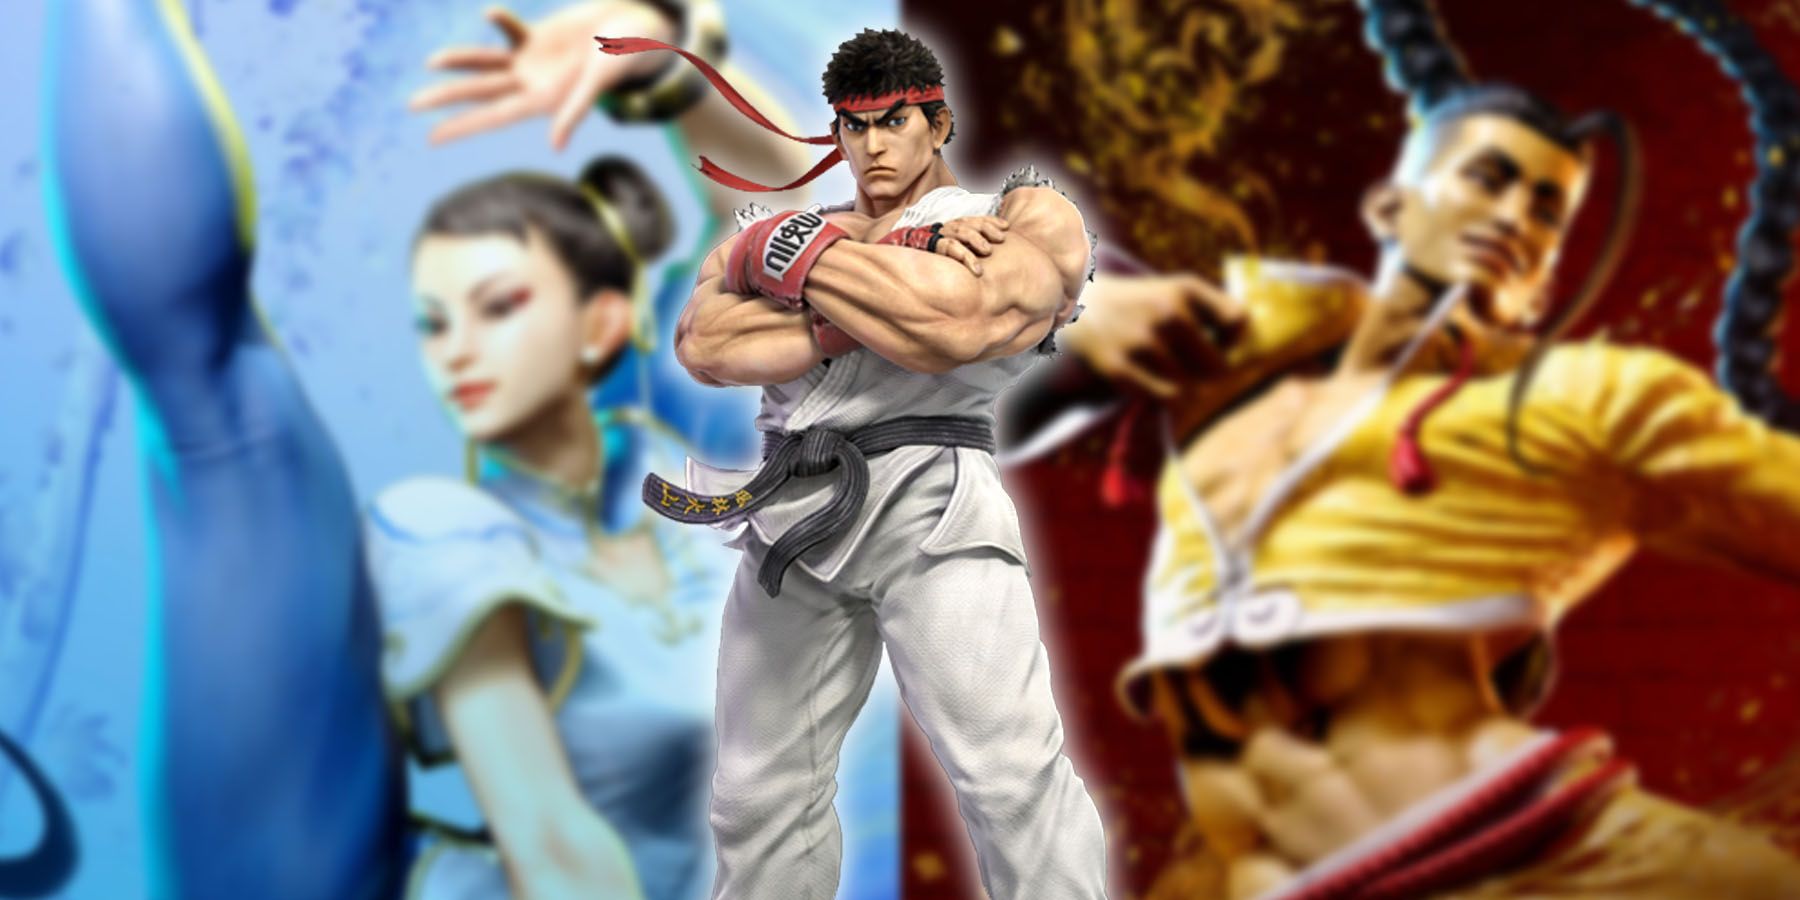 How to unlock Street Fighter 6's classic outfits